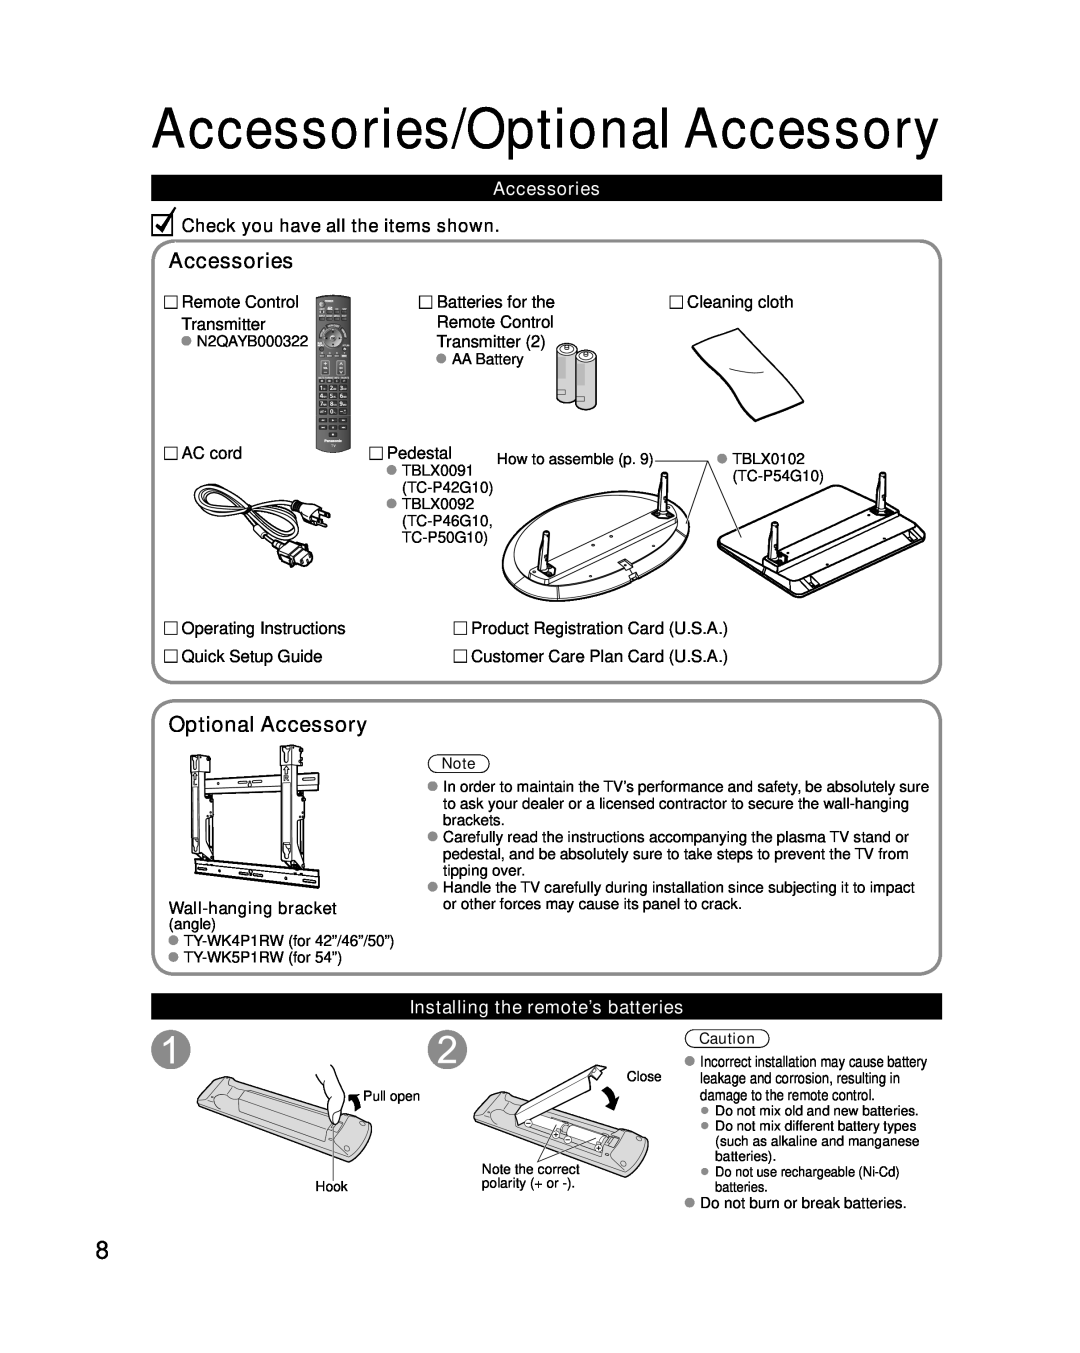 Panasonic TC-P54G10 Accessories/Optional Accessory, Check you have all the items shown, Installing the remote’s batteries 